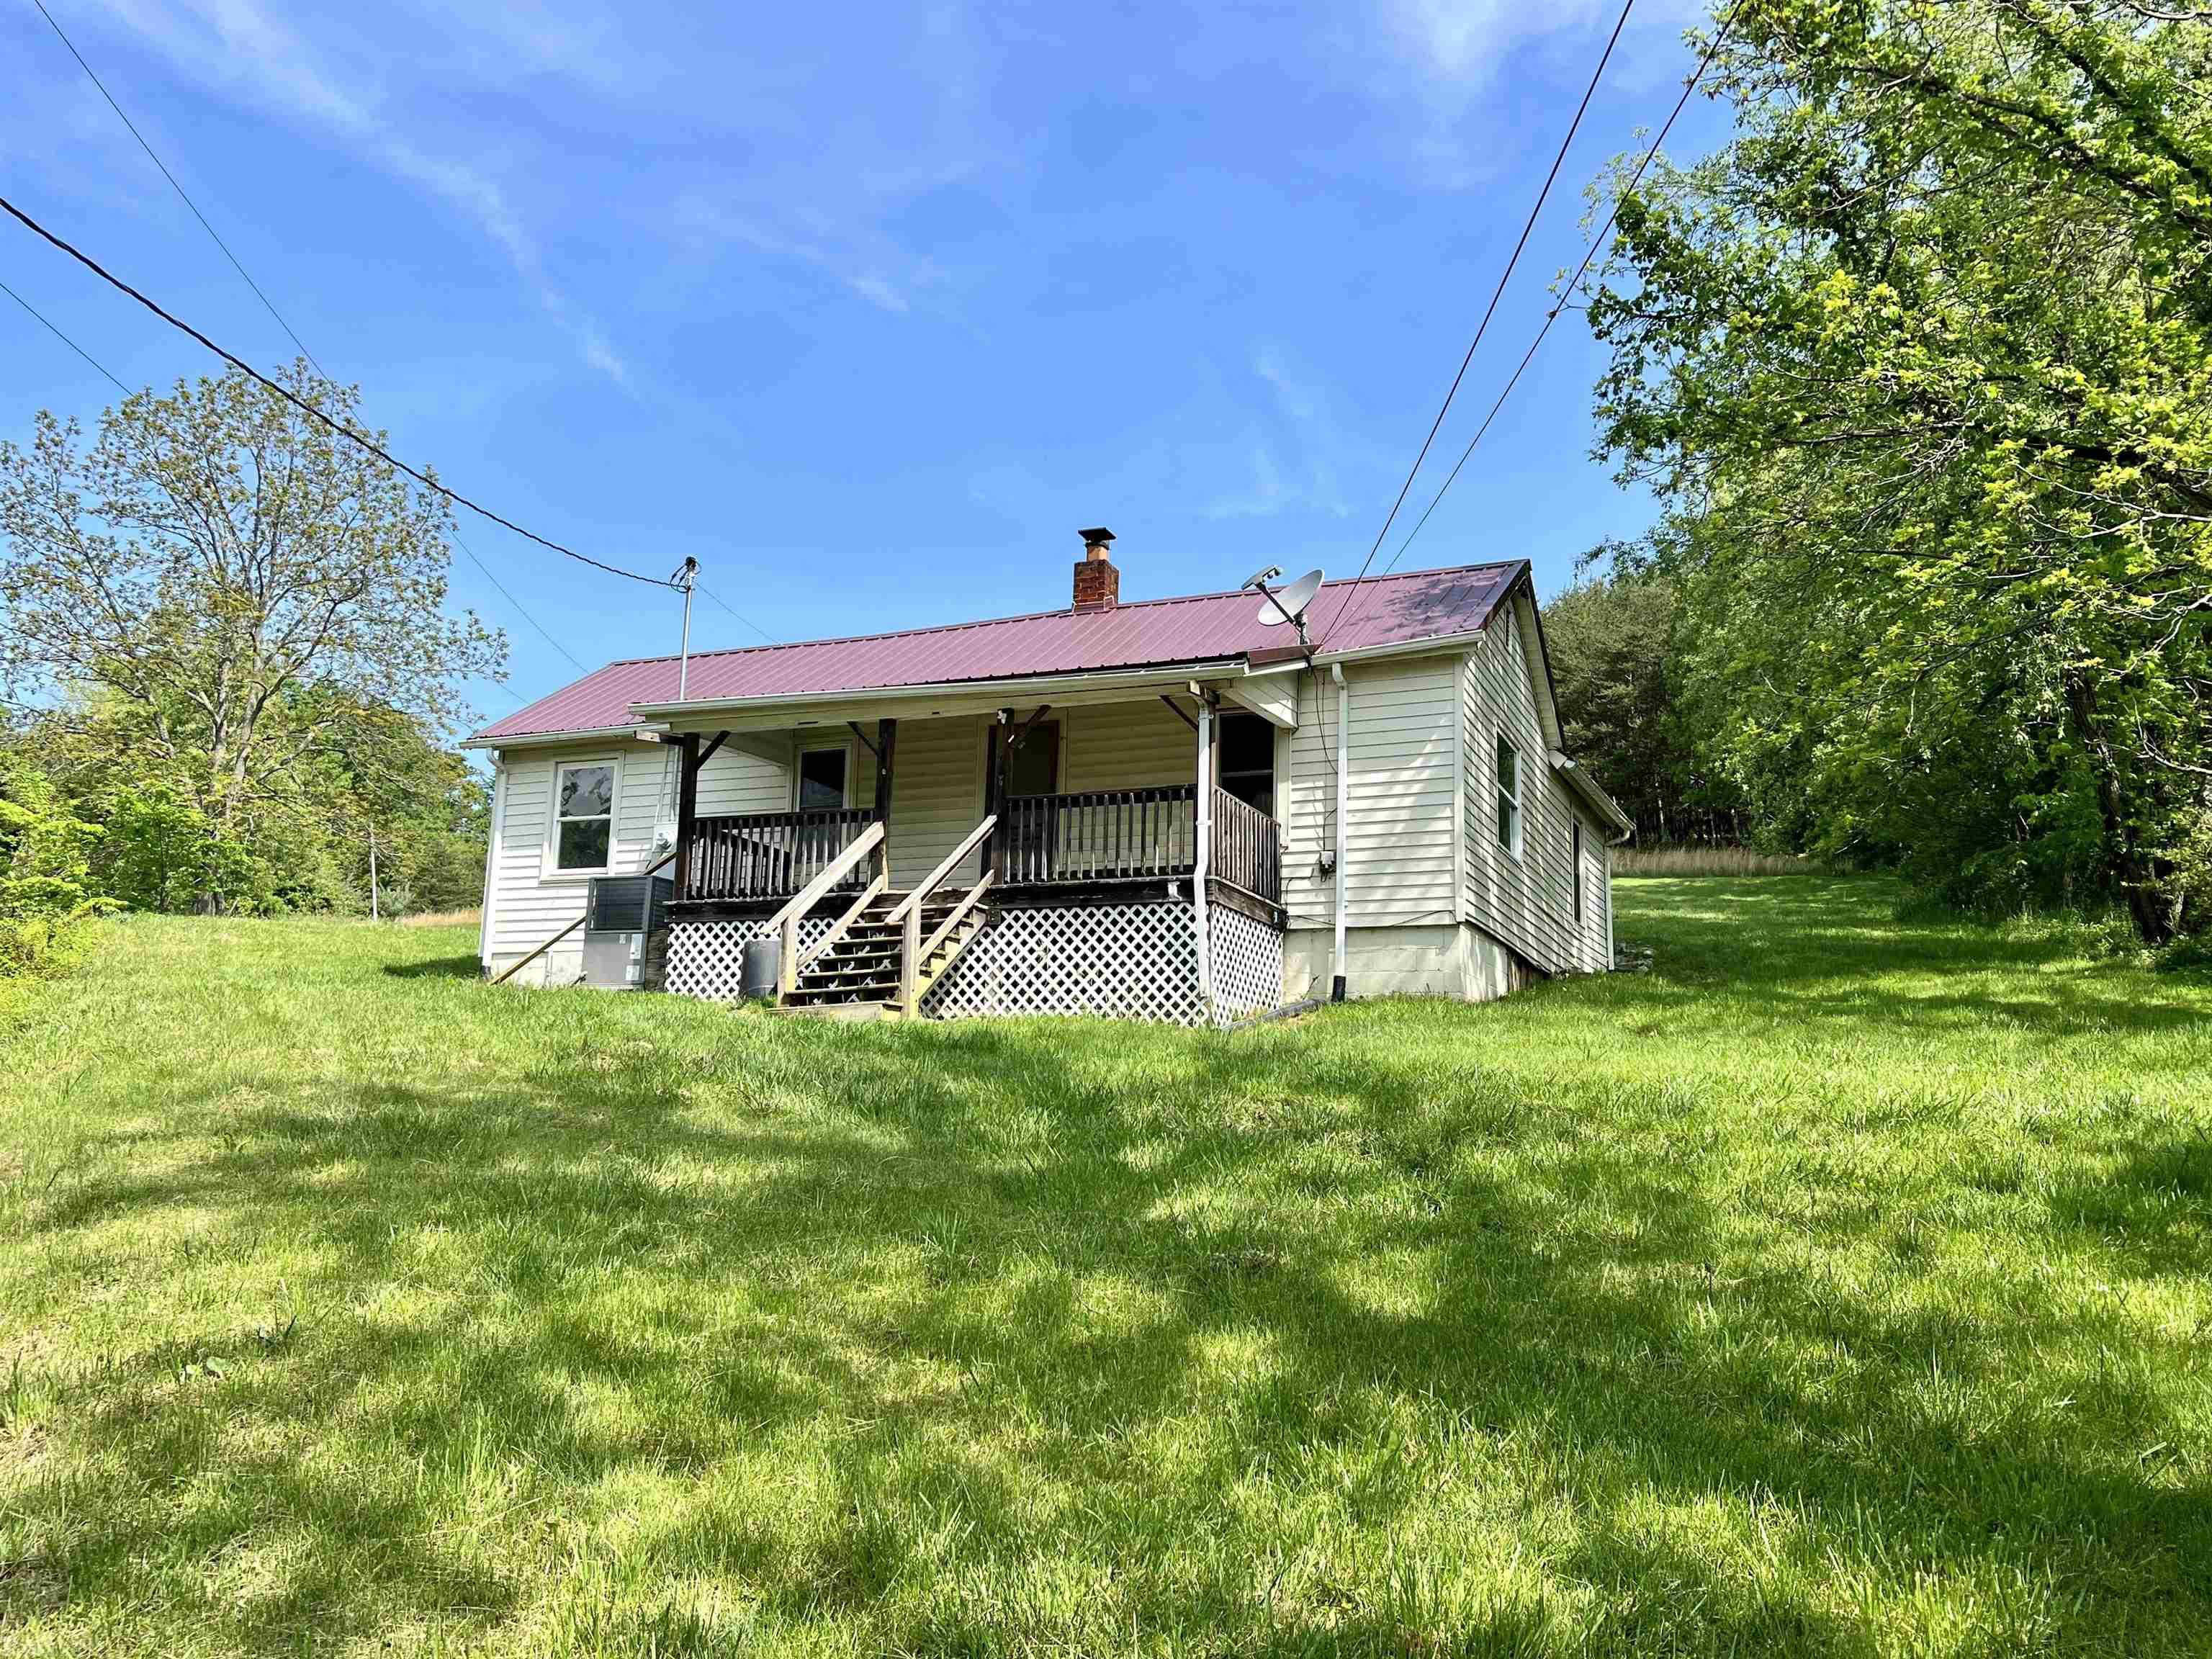 Nestled in Bland County, VA, this 2 bedroom, 1 bath home is a hidden gem awaiting some tender loving care. With approximately 1000 square feet of finished space, it presents a canvas for customization and personalization. The potential is immense. Features include a metal roof, heat pump, all tile and laminate wood flooring except for the bathroom, and tilt windows. Situated on nearly an acre of land, there's ample room for expansion and outdoor activities. Enjoy the view from the covered front porch. Outbuilding for storage, paved road frontage, septic, and shared well. Perfectly located near the Appalachian Trail, it offers endless opportunities for outdoor adventures. Embrace the chance to transform this dwelling into your dream home, surrounded by the natural beauty of Bland County.